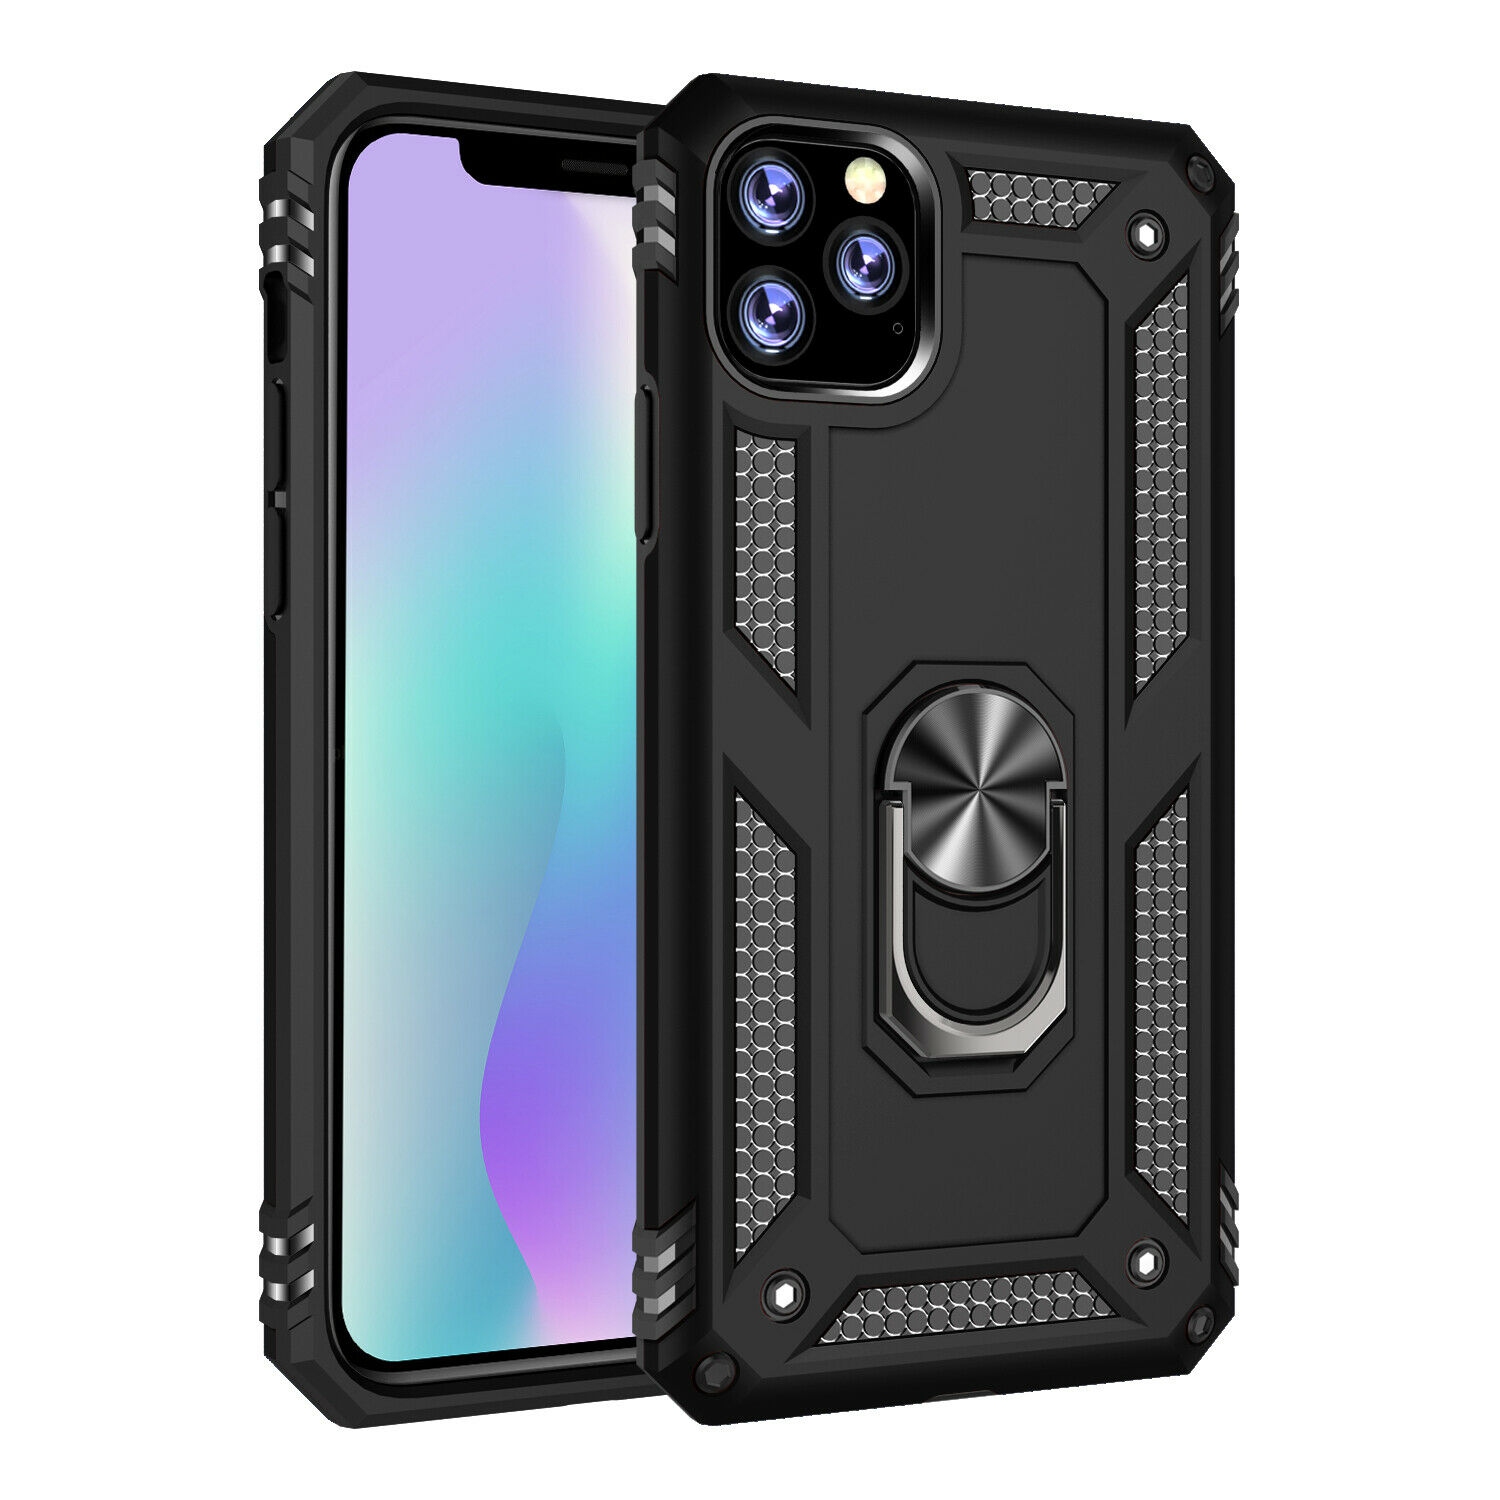 【CSmart】 Anti-Drop Hybrid Magnetic Hard Armor Case with Ring Holder for iPhone 12 Pro Max (6.7"), Black